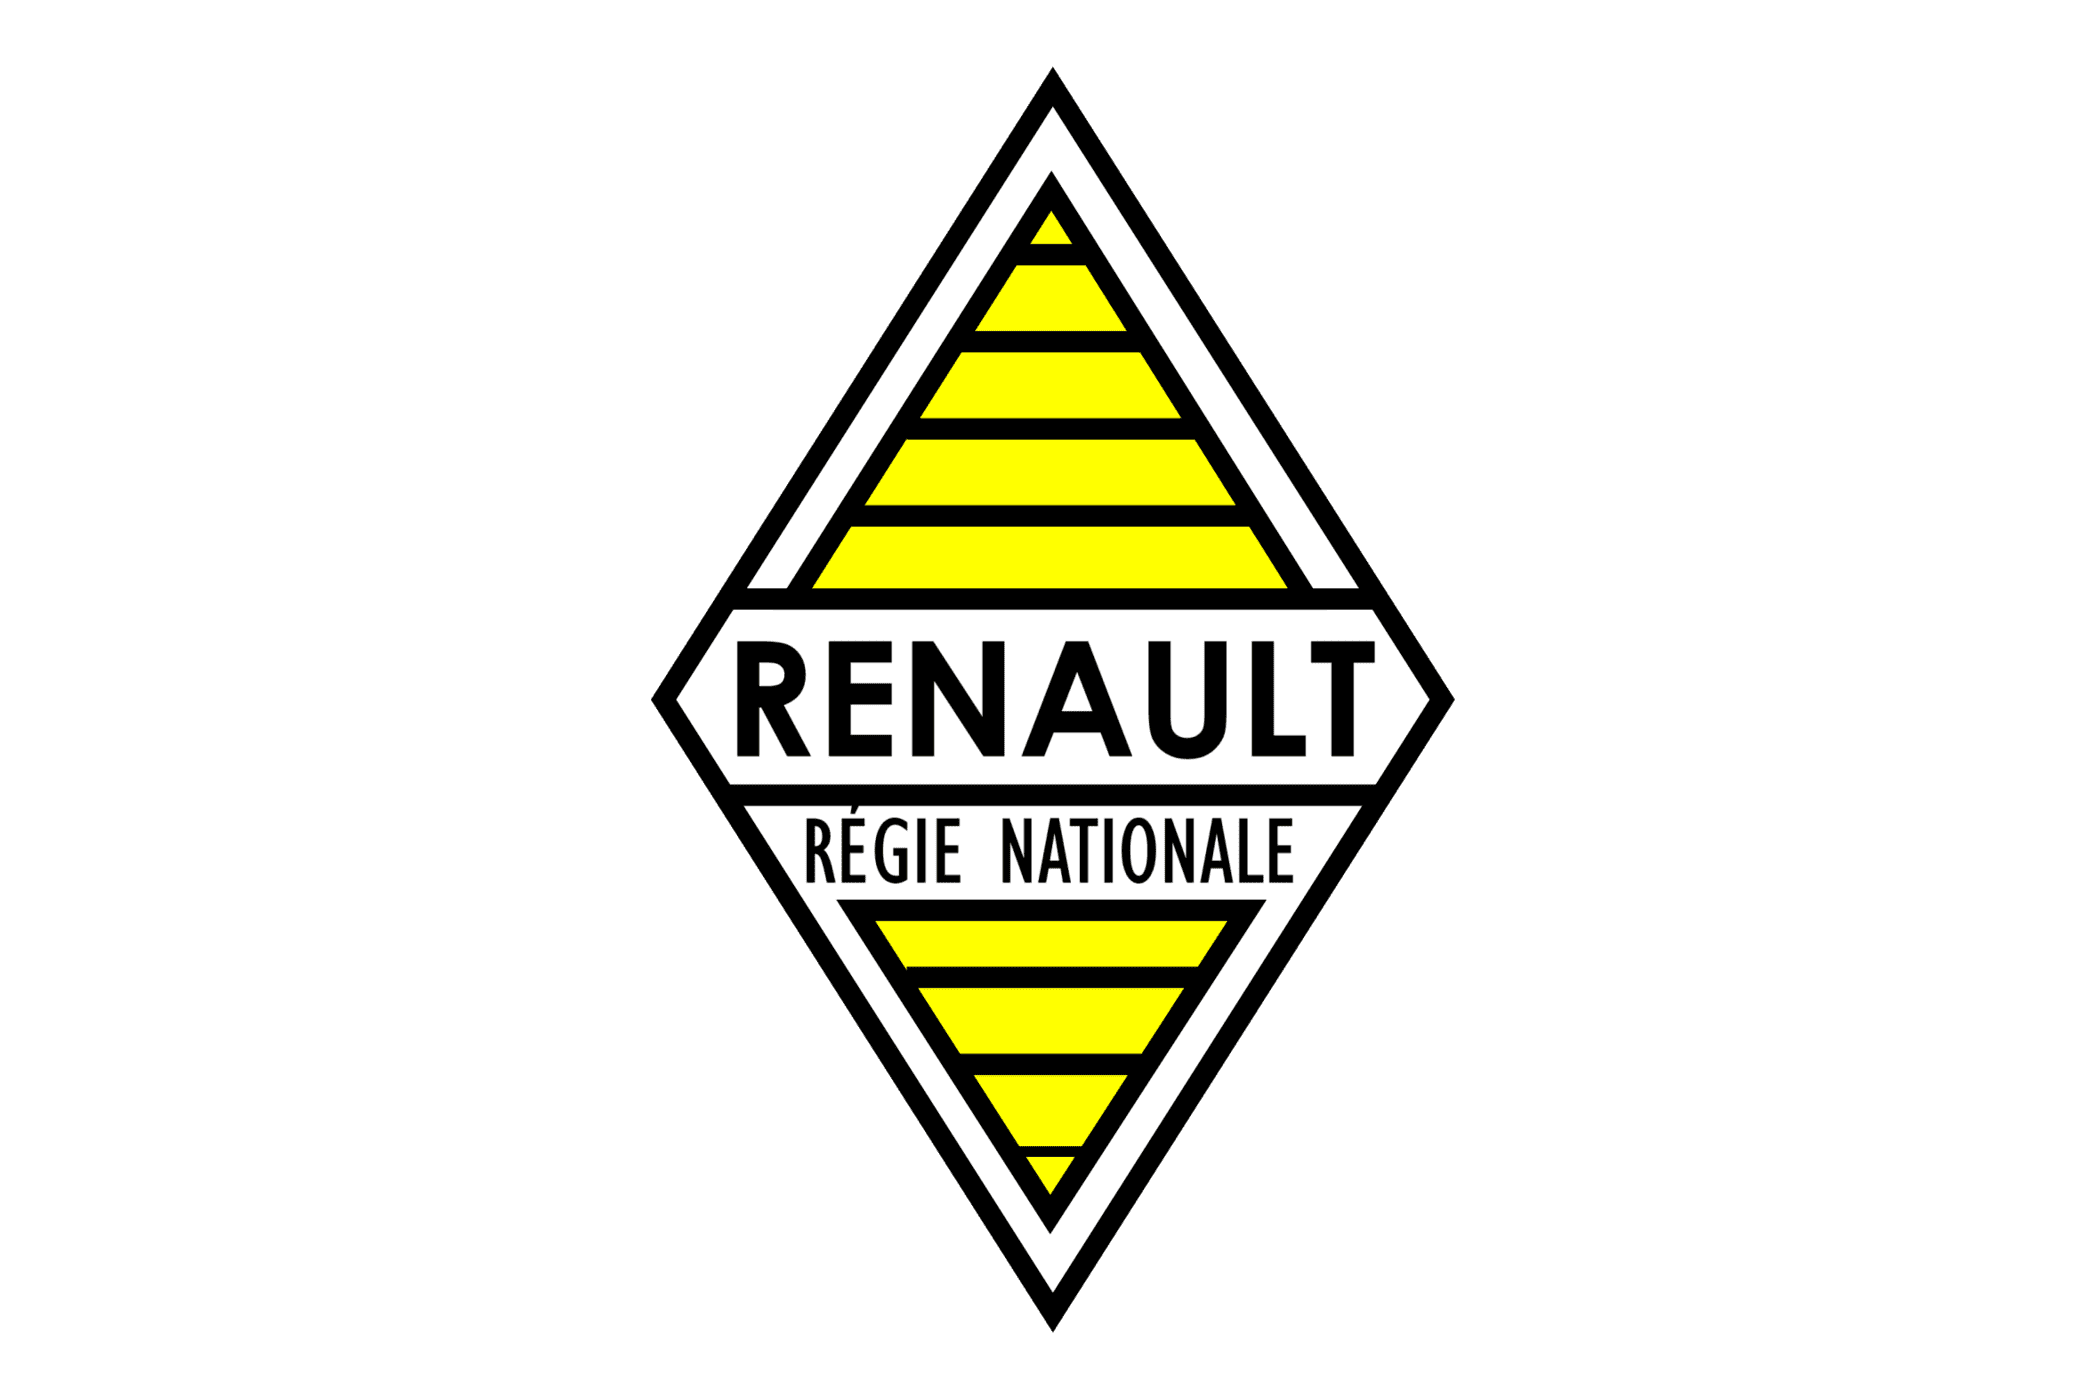 logolearn on Instagram: “Thoughts about the new Renault logo